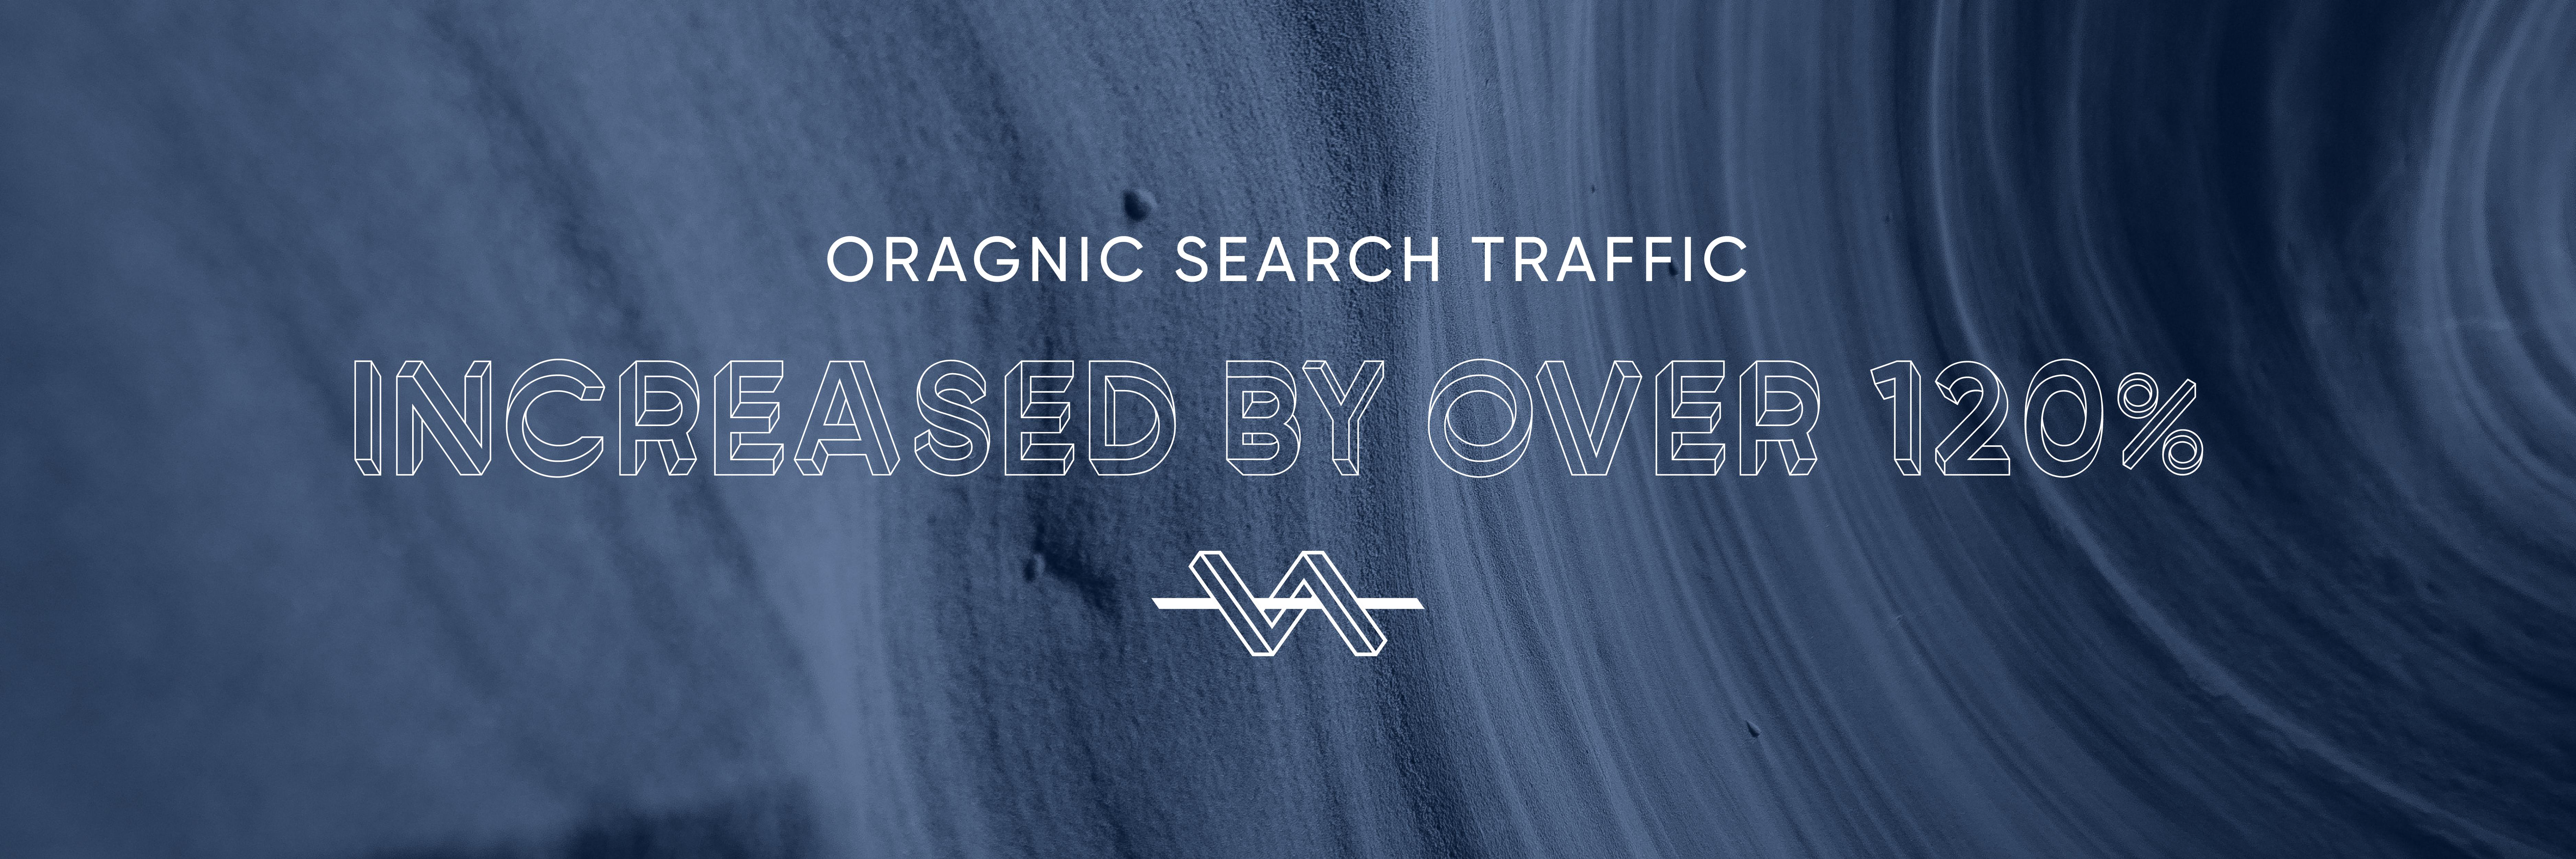 Organic search traffic increased by over 120%